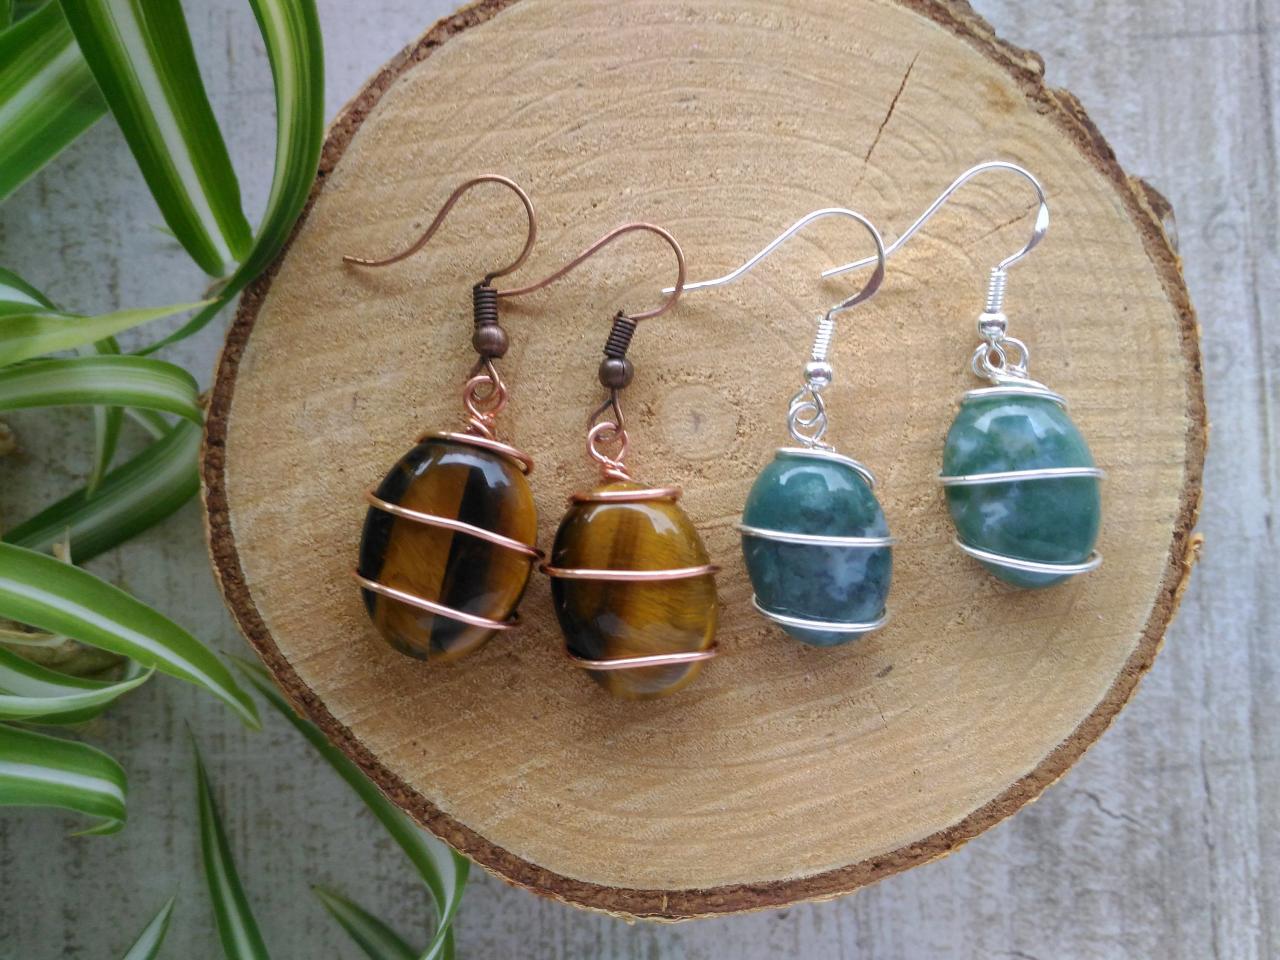 Wire Wrapped Gemstone Earrings, Tigers Eye Earrings, Blue Green Agate Earrings, Dainty Gemstone Dangles, Small Copper And Silver Earrings